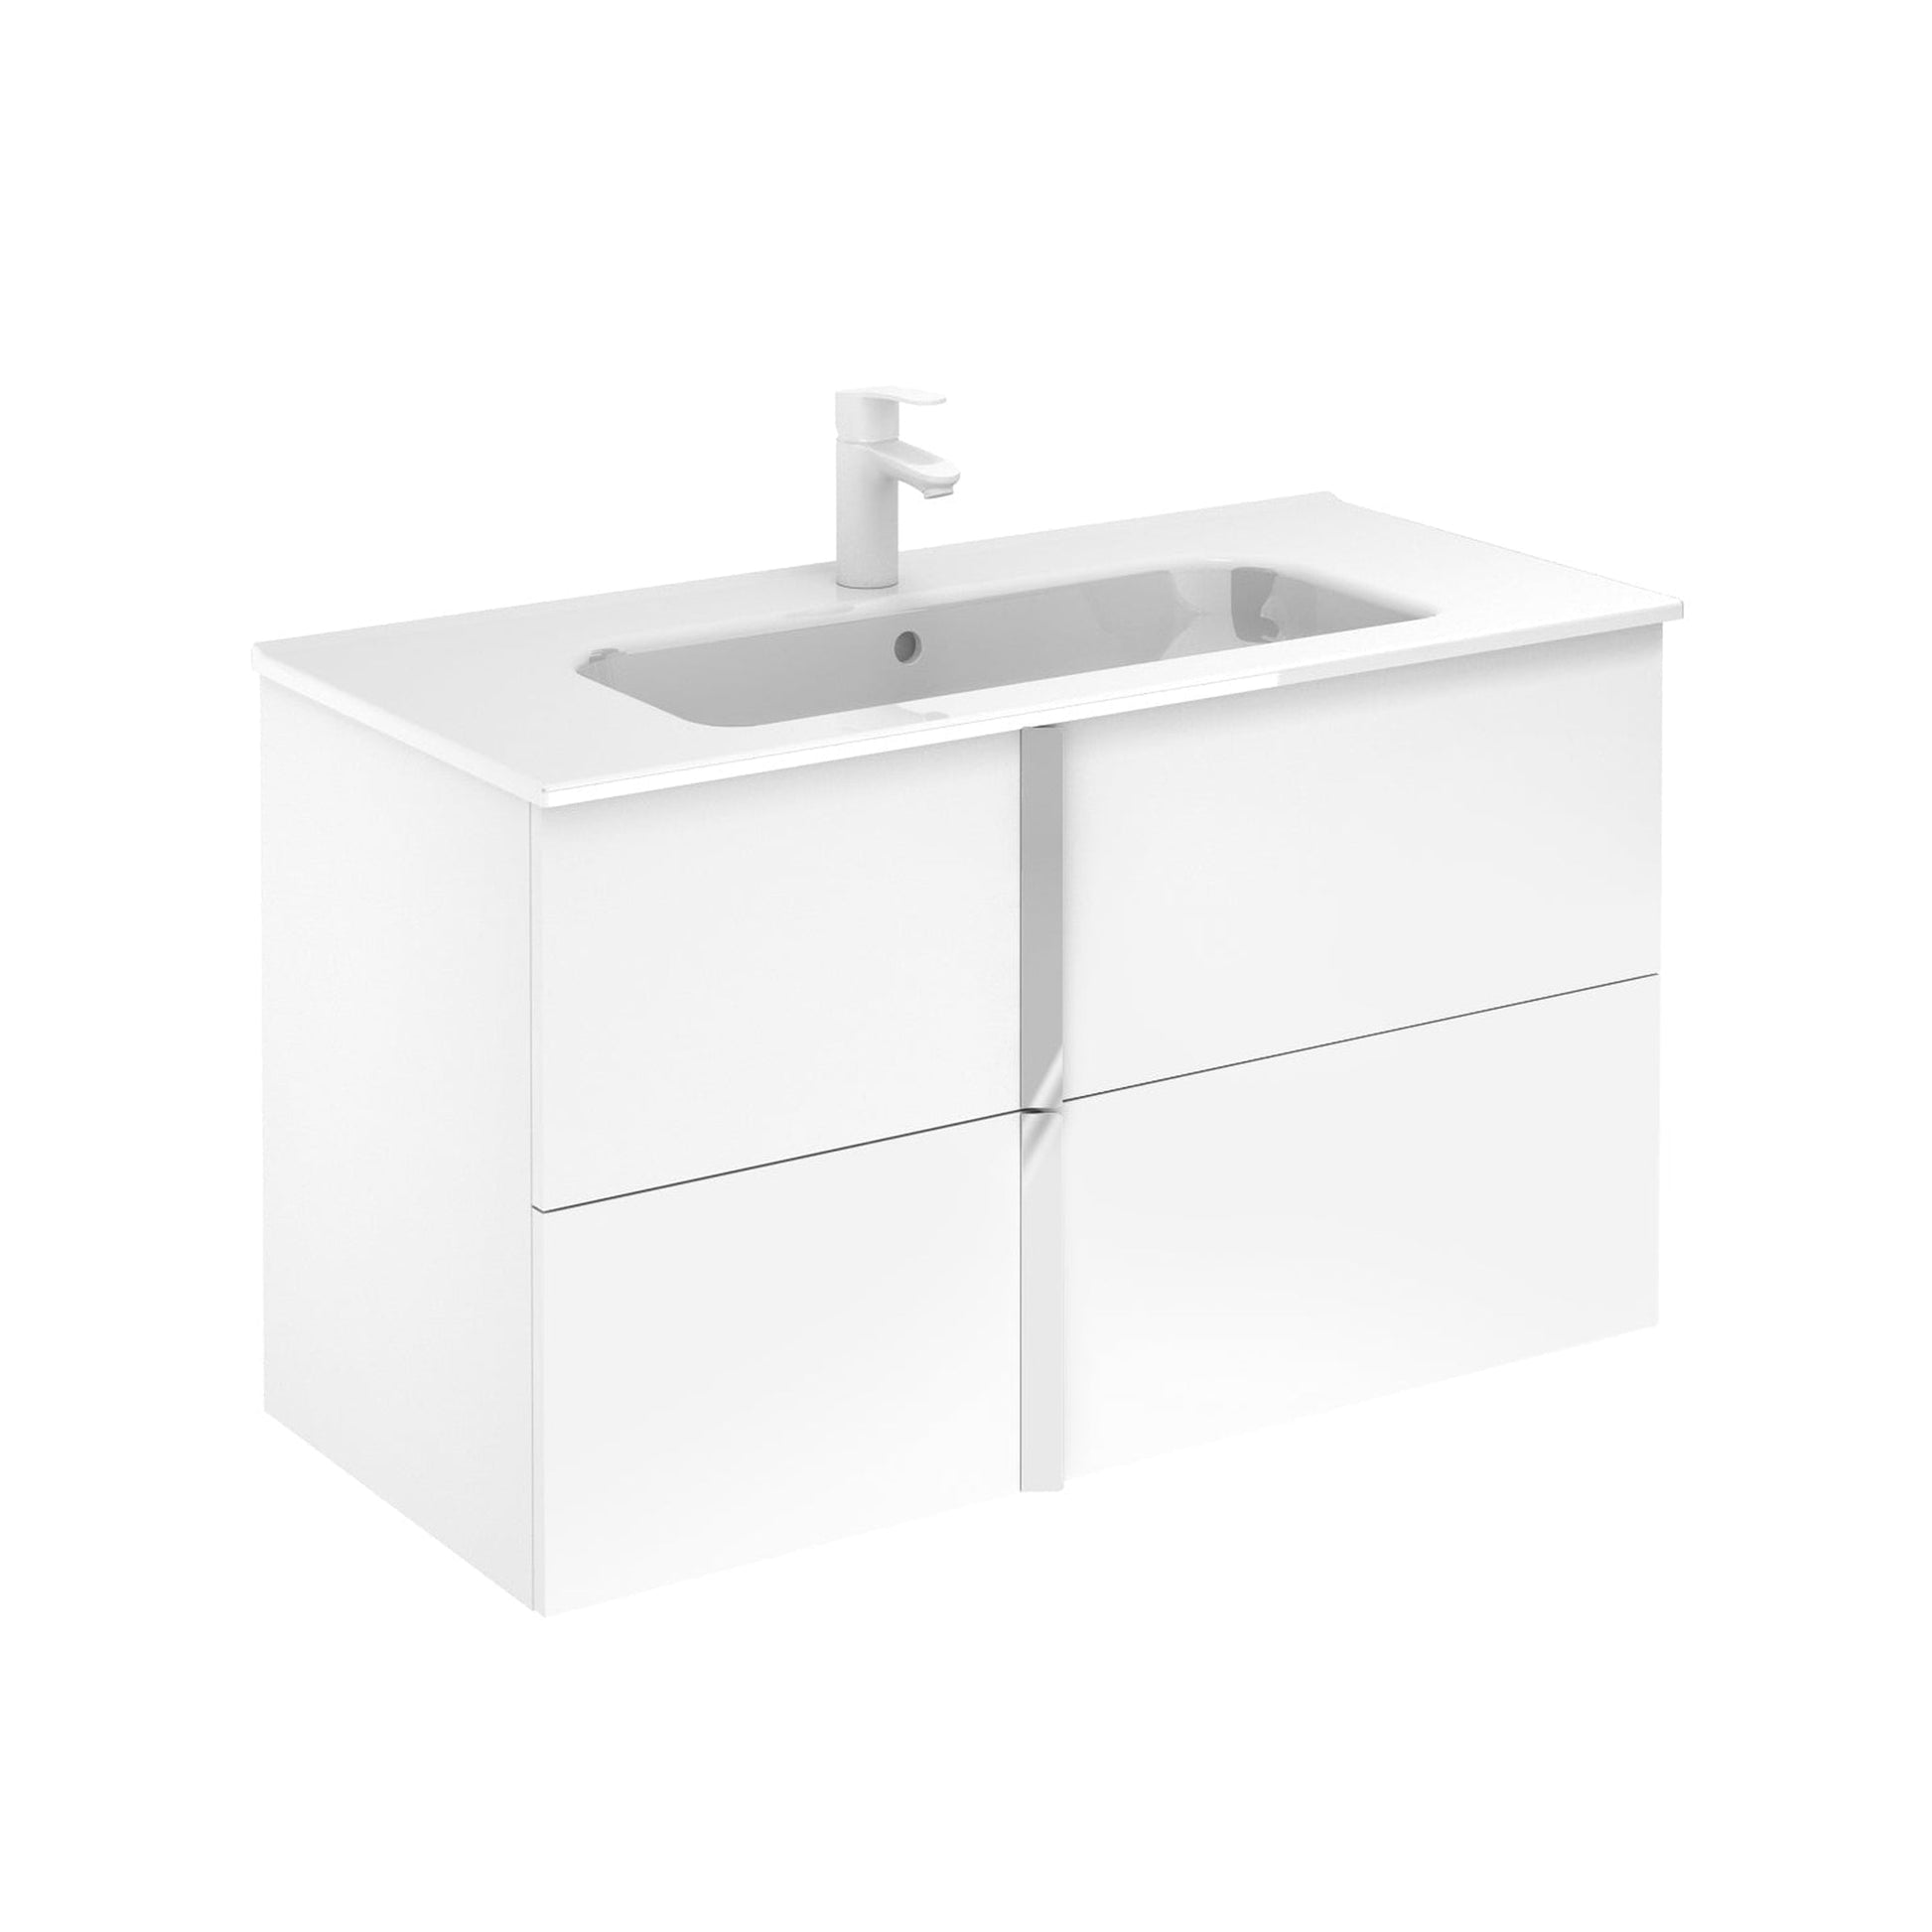 Royo Onix+ 40" x 18" White Modern Wall-mounted Vanity With 2 Drawers and Chrome Handle